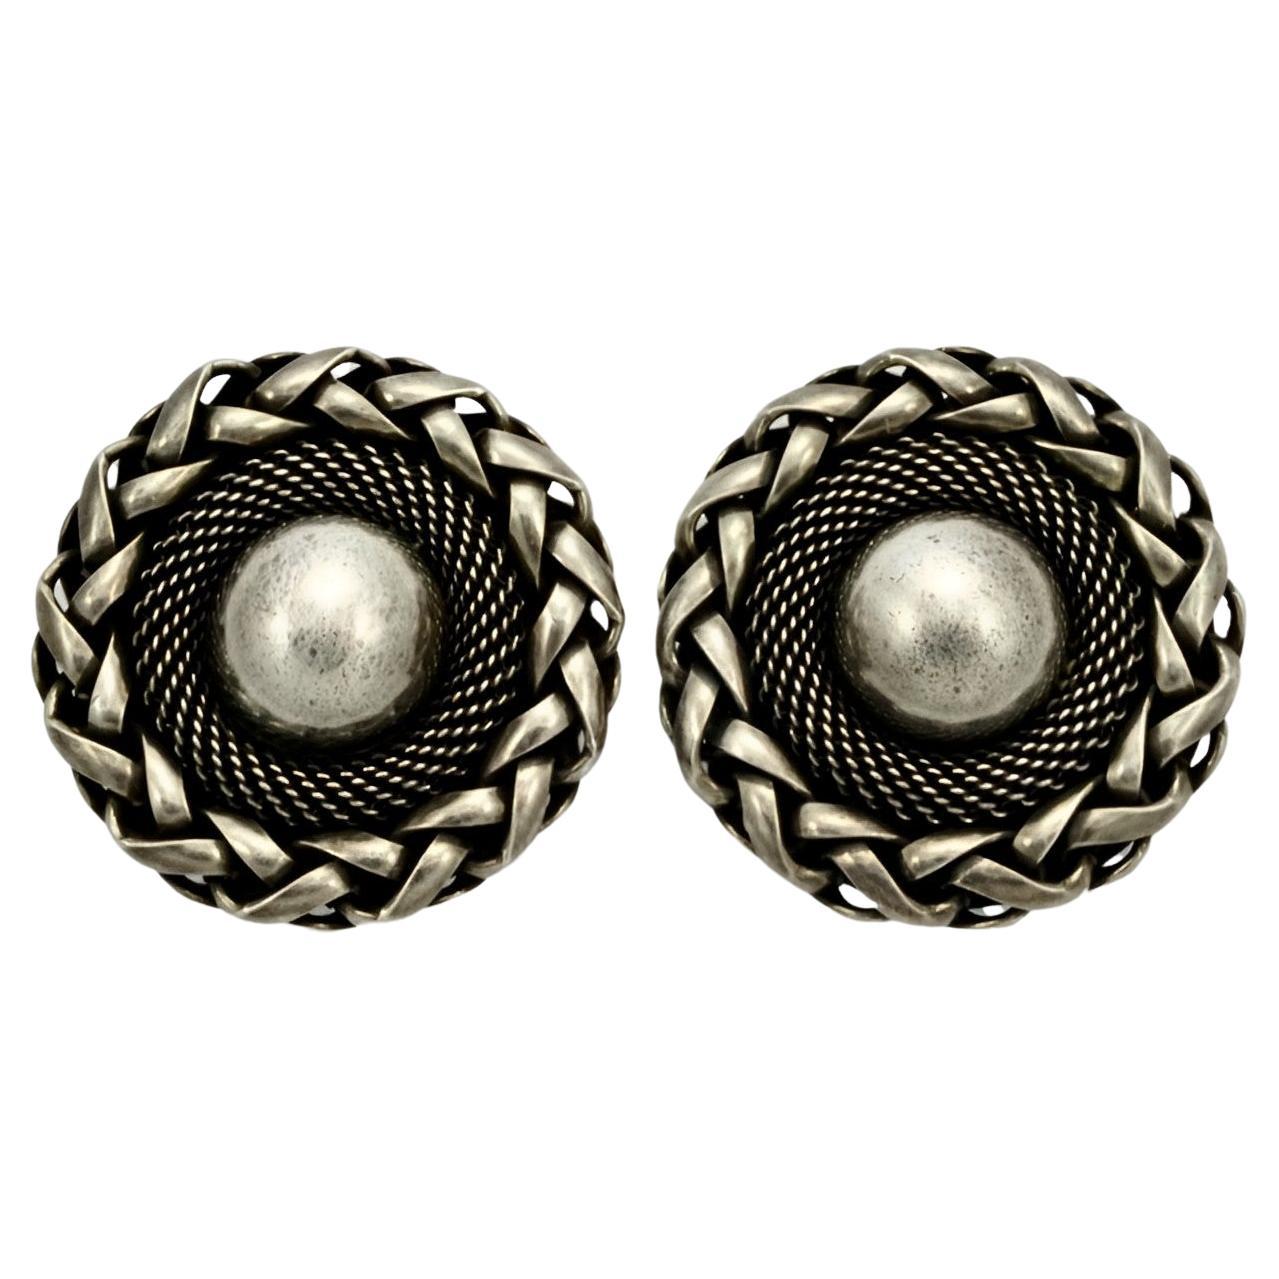 Butler & Wilson Silver Tone Ornate Clip On Earrings circa 1980s For Sale